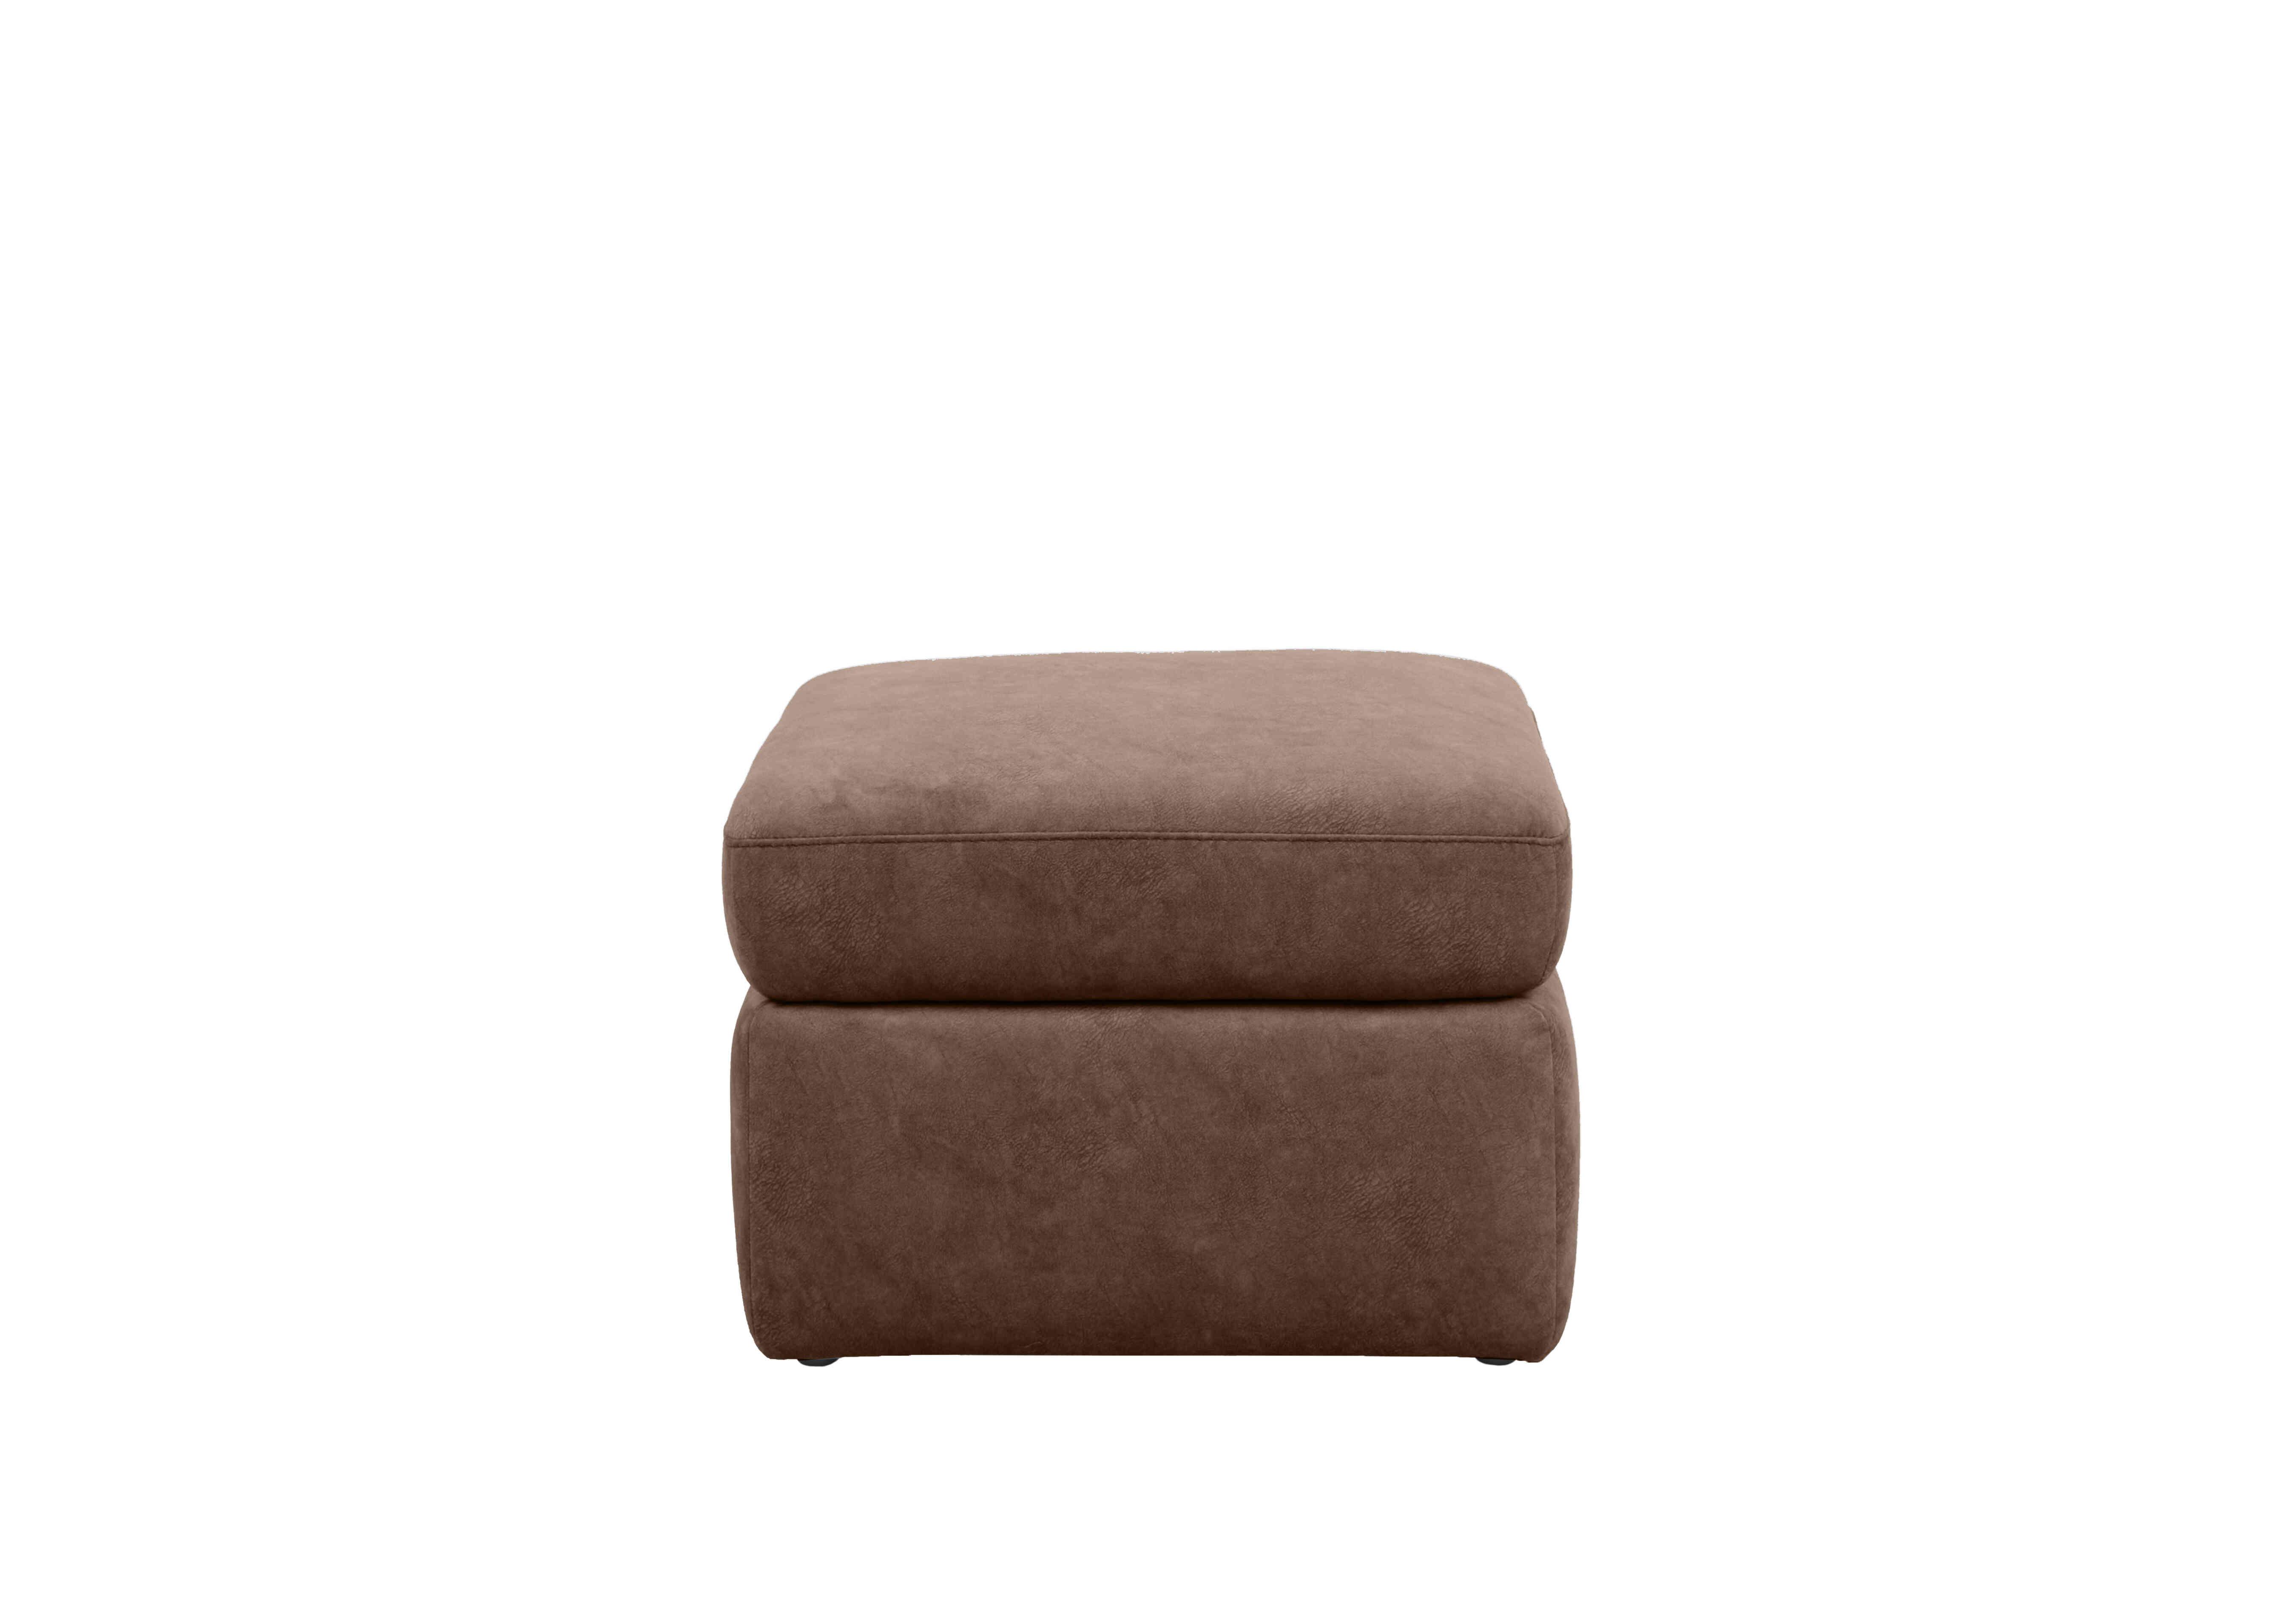 Berlin Fabric Storage Footstool in Classic Brown Be-0105 on Furniture Village